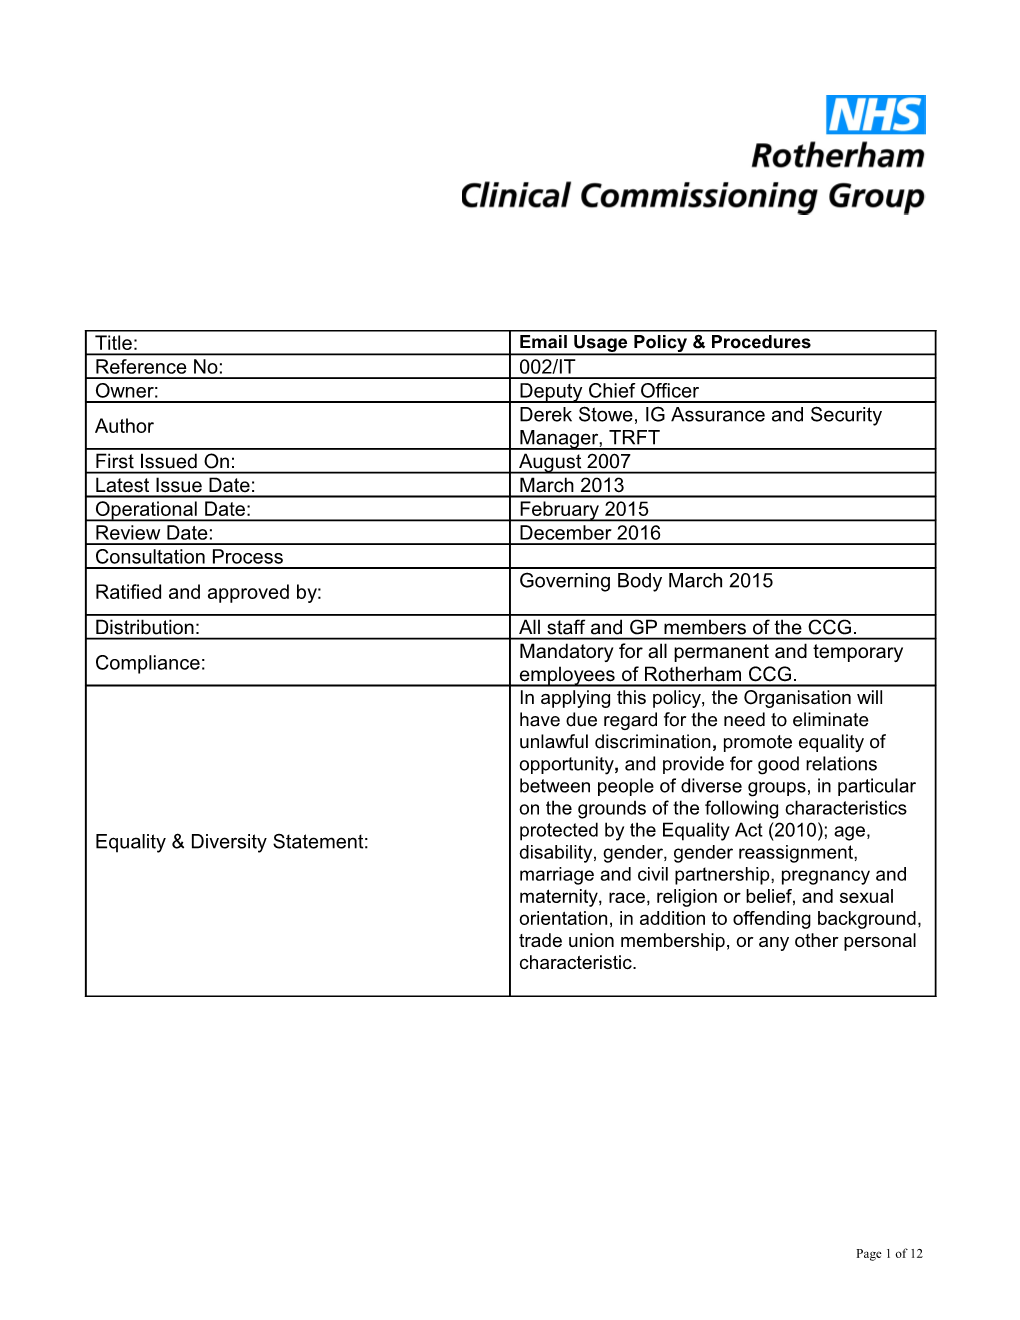 This Document Defines the Email Policy for Rotherham CCG. the Email Policy Applies to All